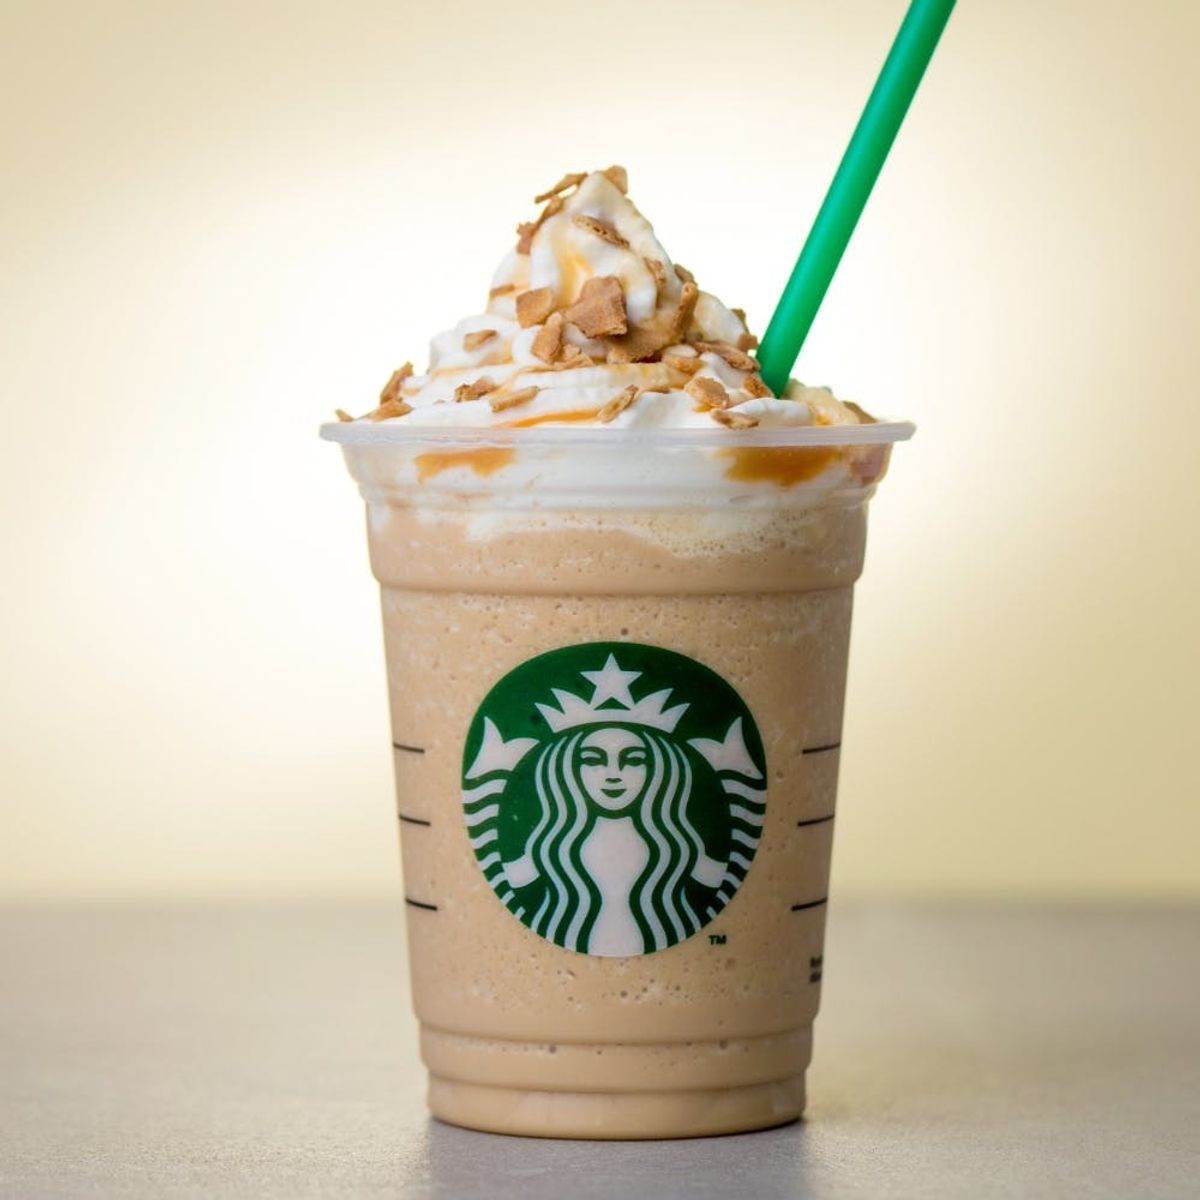 Starbucks’ Caramel Waffle Cone Frappucino Is Your New Summer Drink